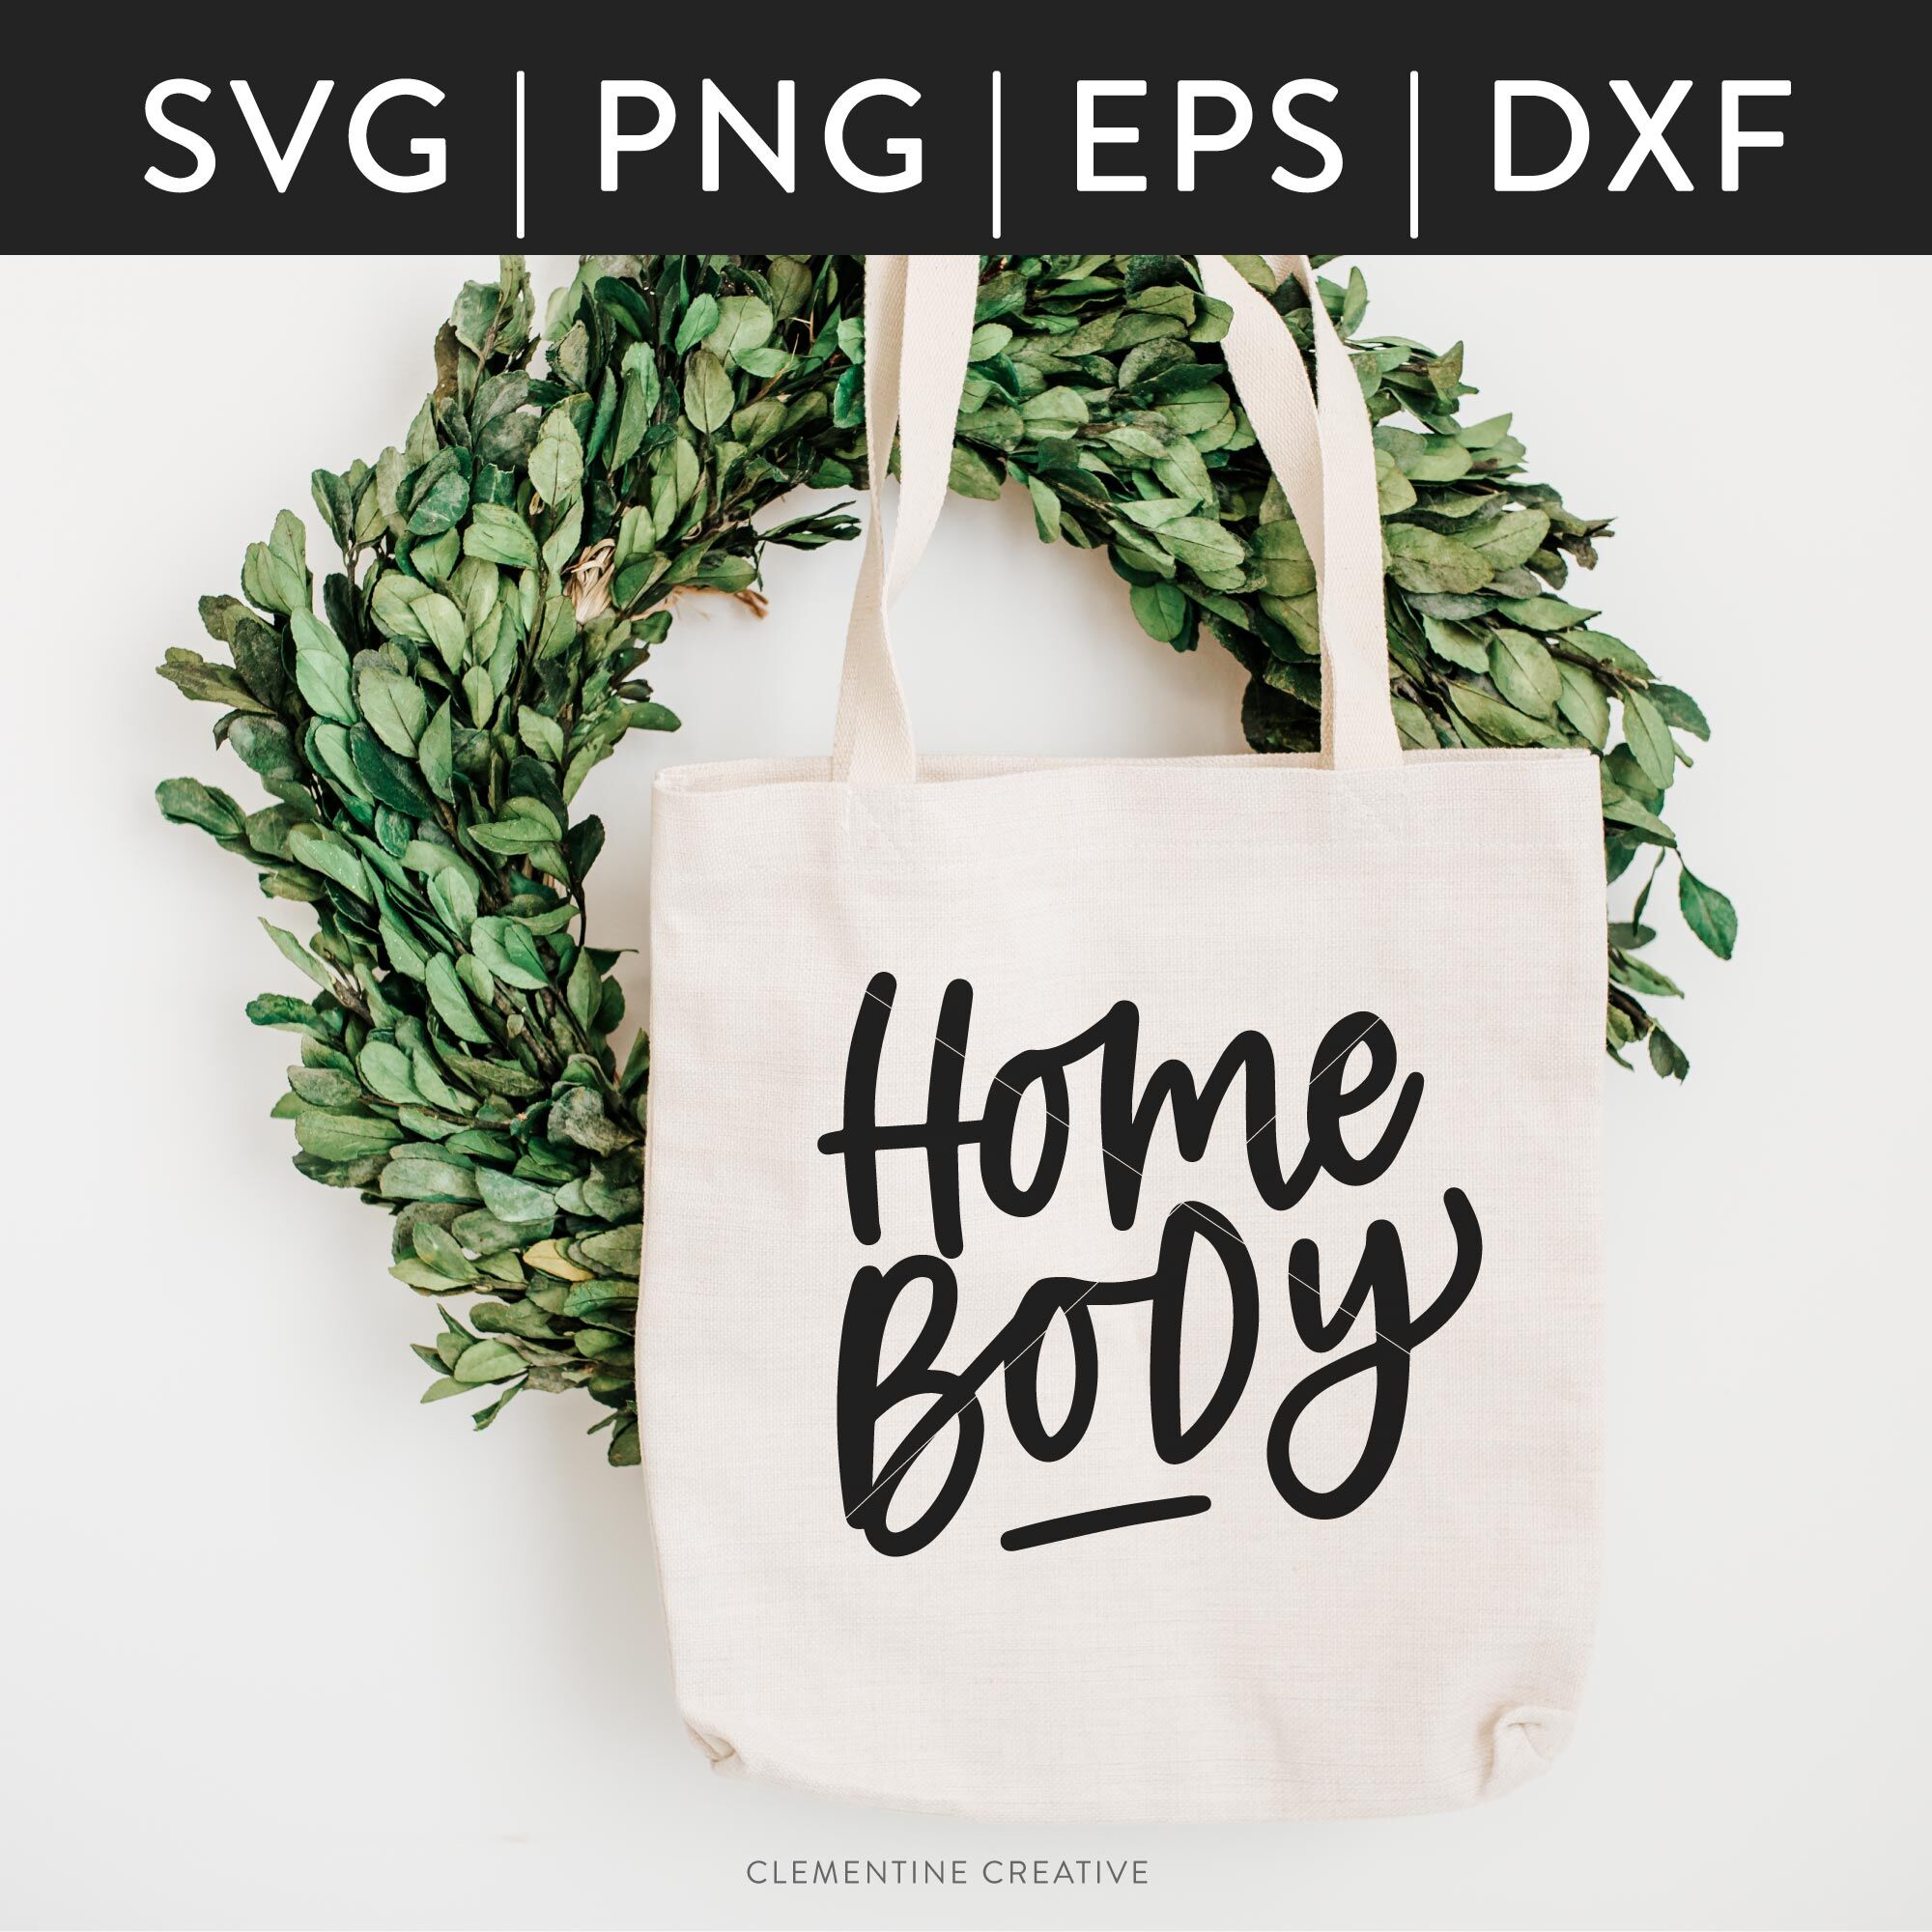 Homebody Svg By Clementine Creative Thehungryjpeg Com